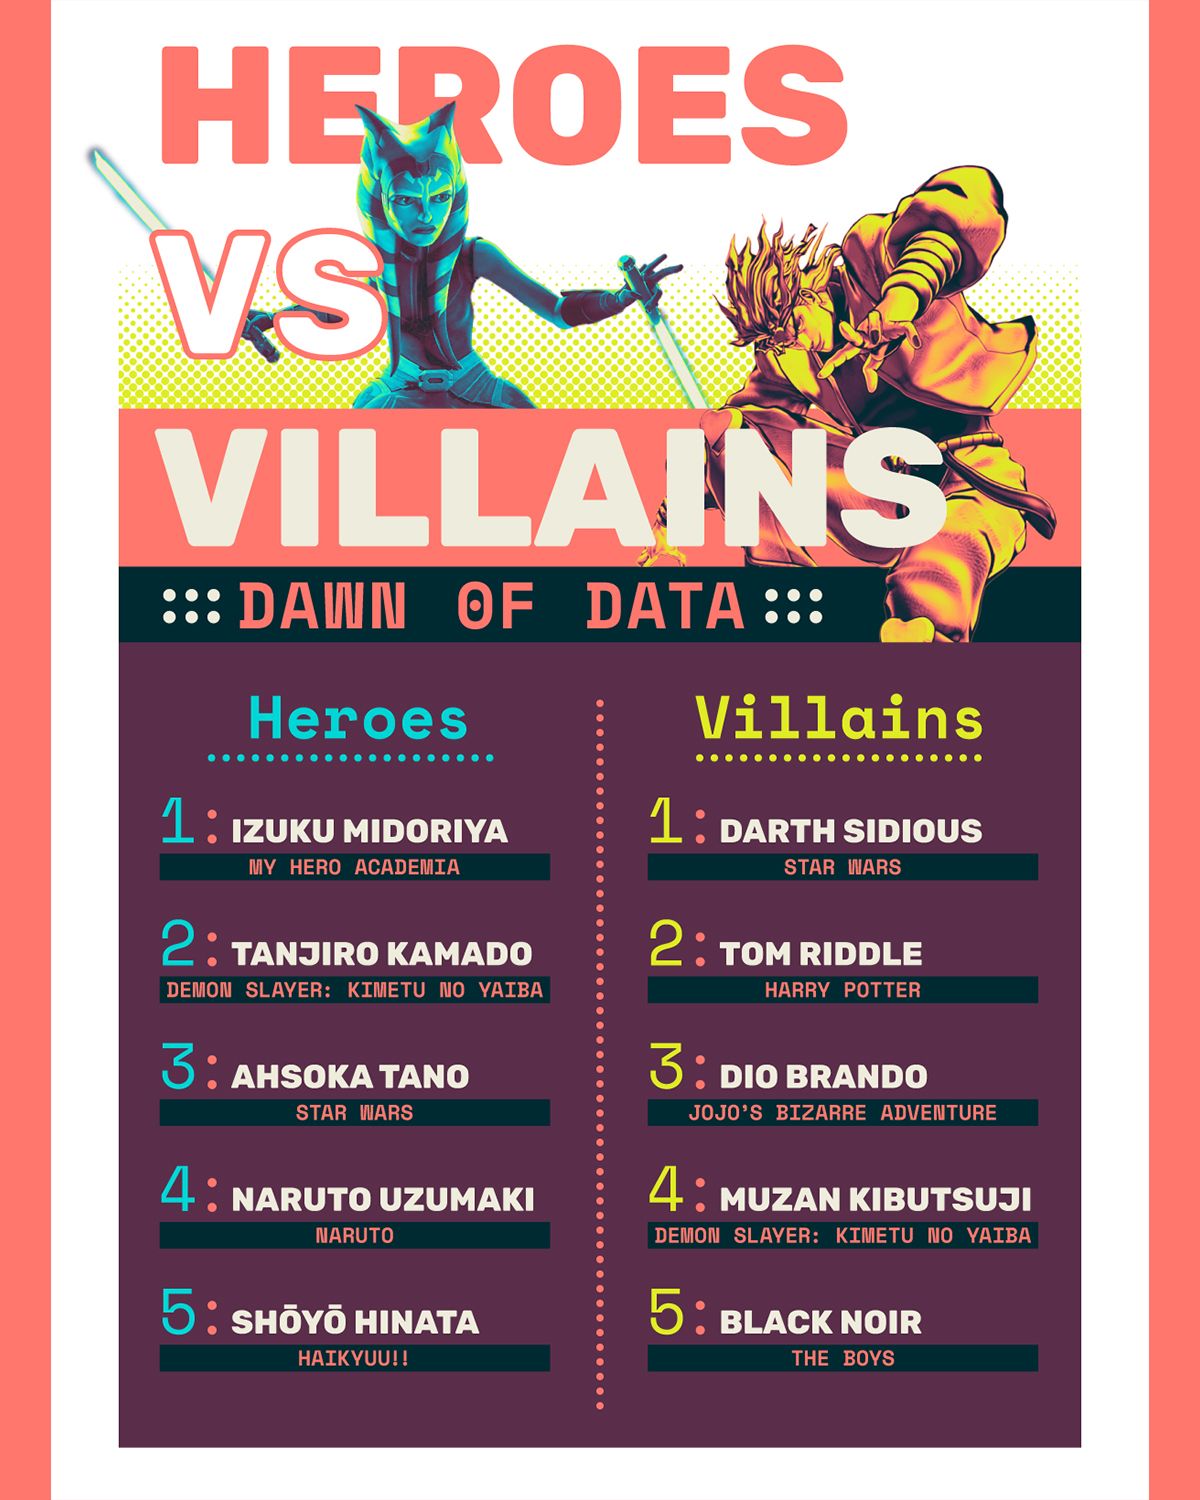 Here are the top 5 heroes and villains that Fandom users were hooked on in 2020